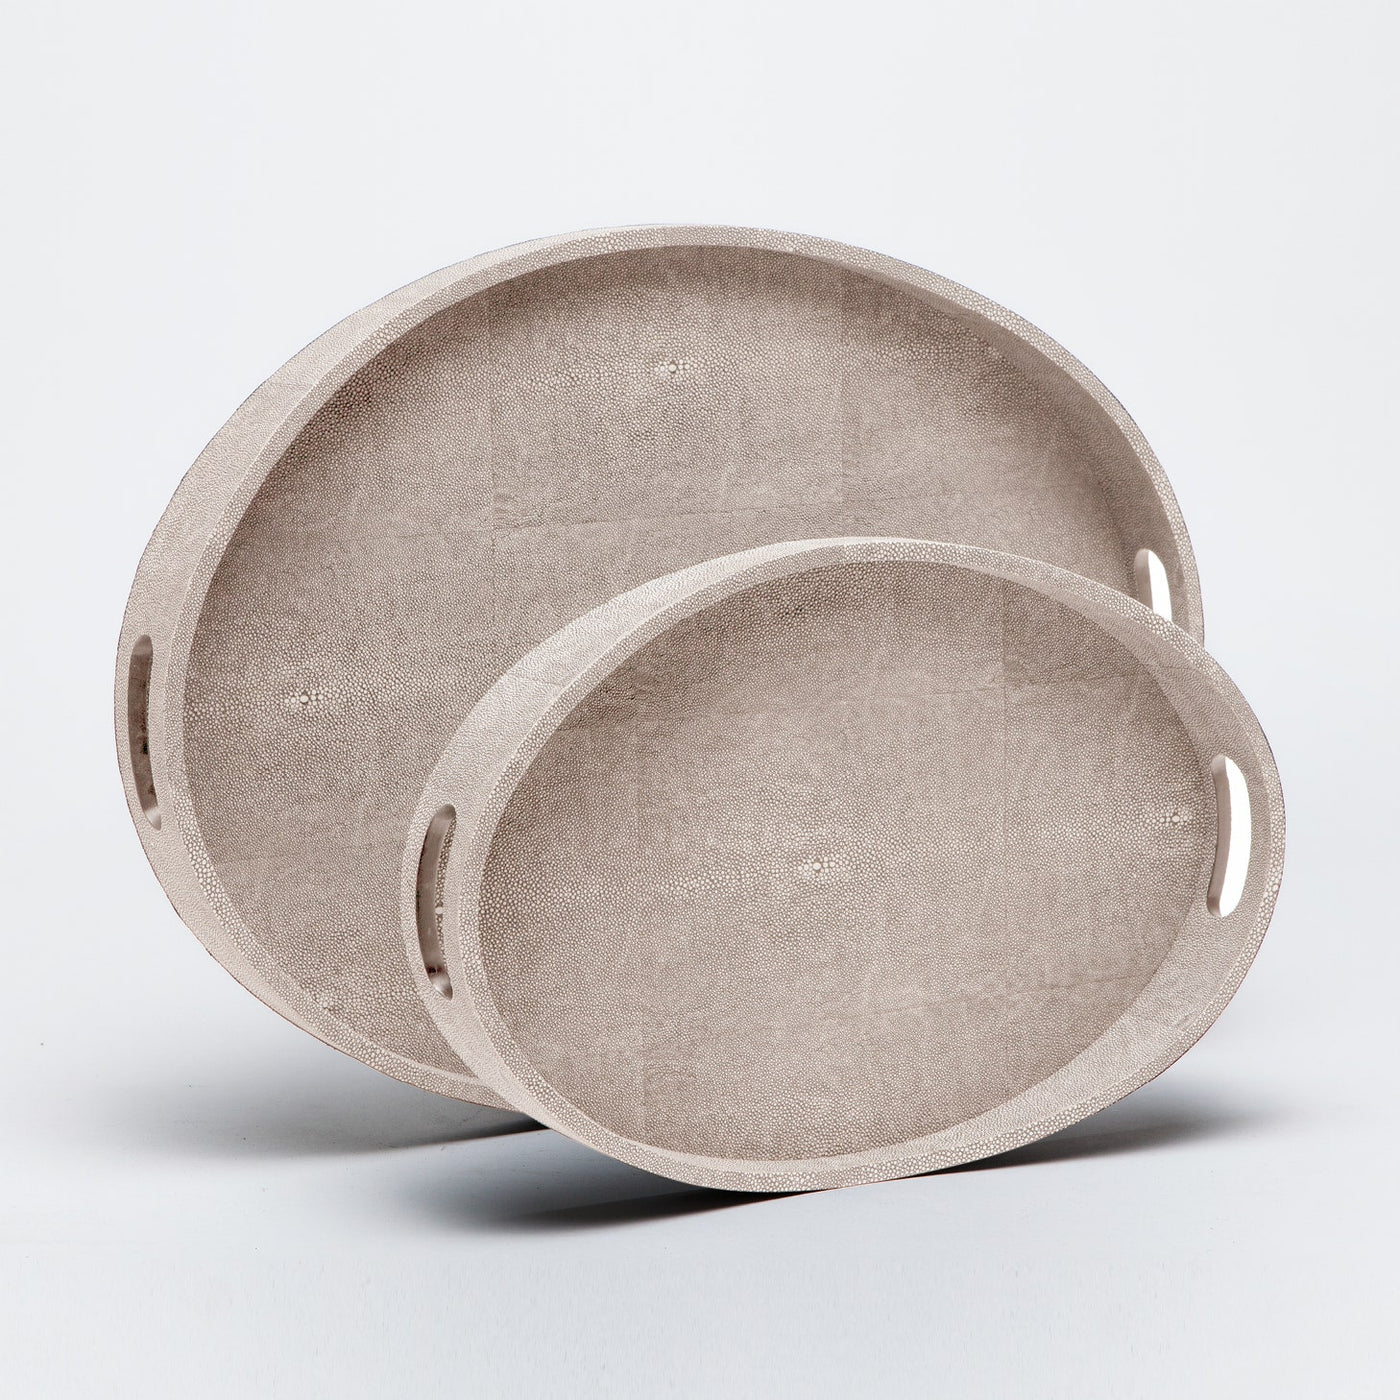 TRAY SAND FAUX SHAGREEN OVAL (Available in 2 Sizes)